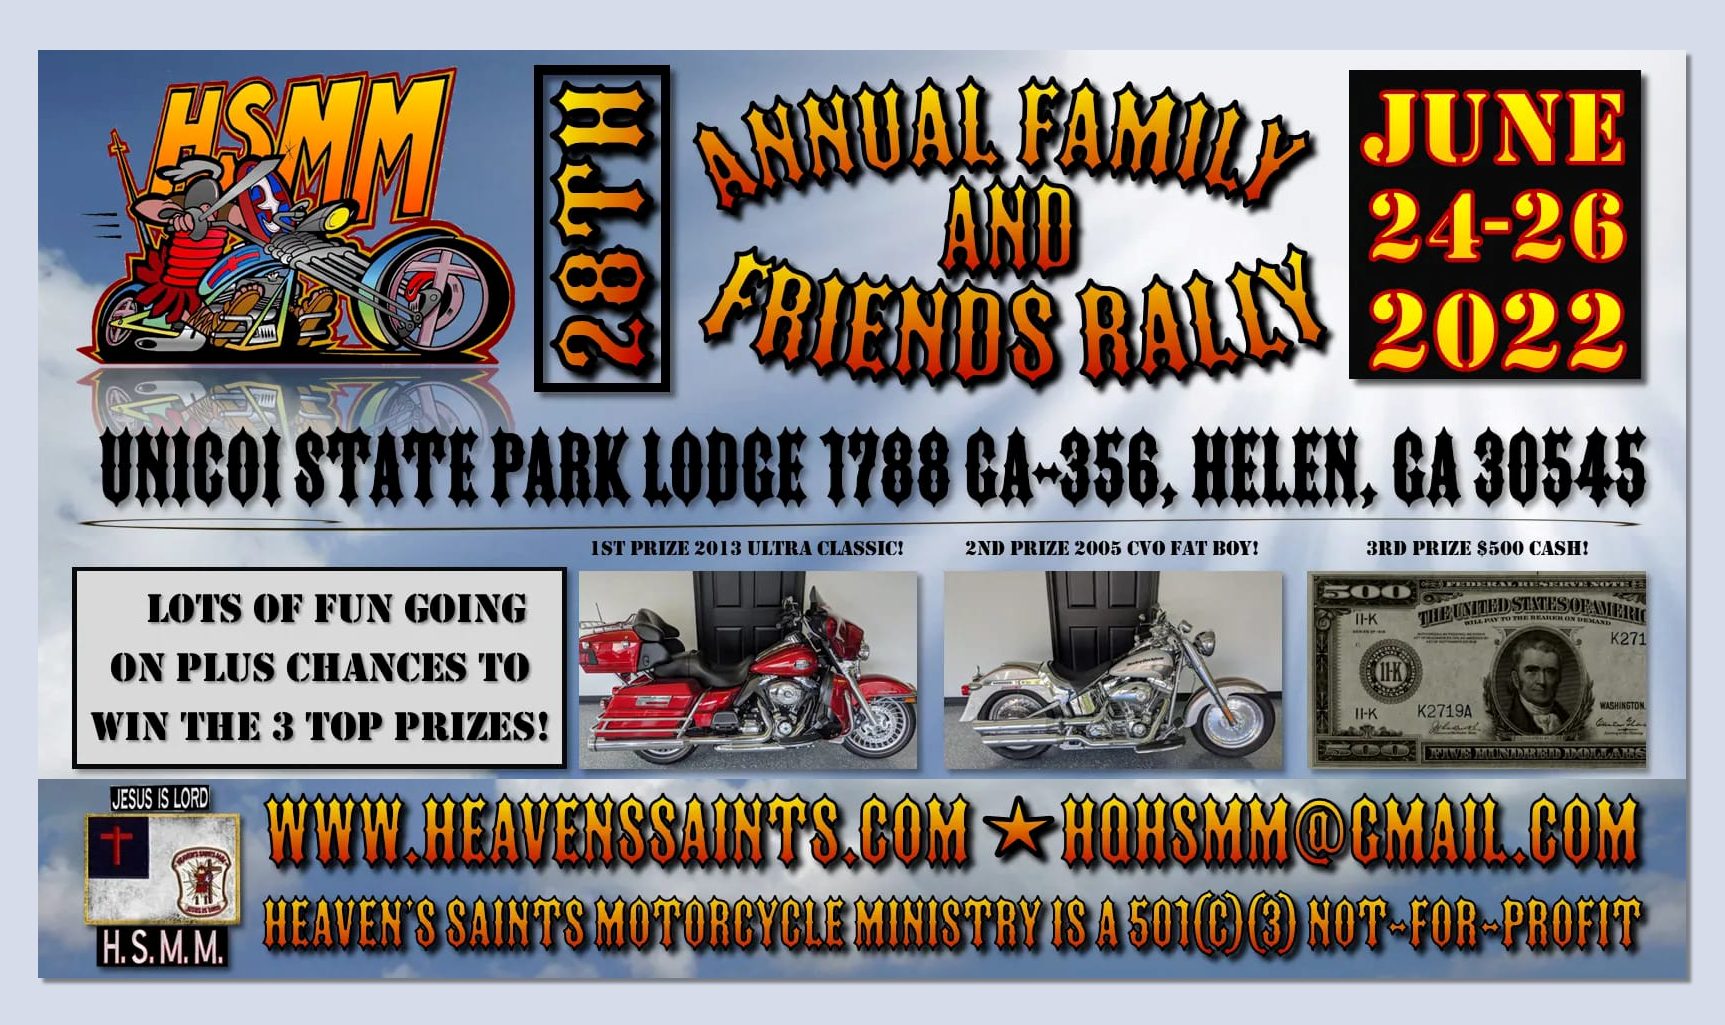 28th Annual HSMM Family & Friends Rally